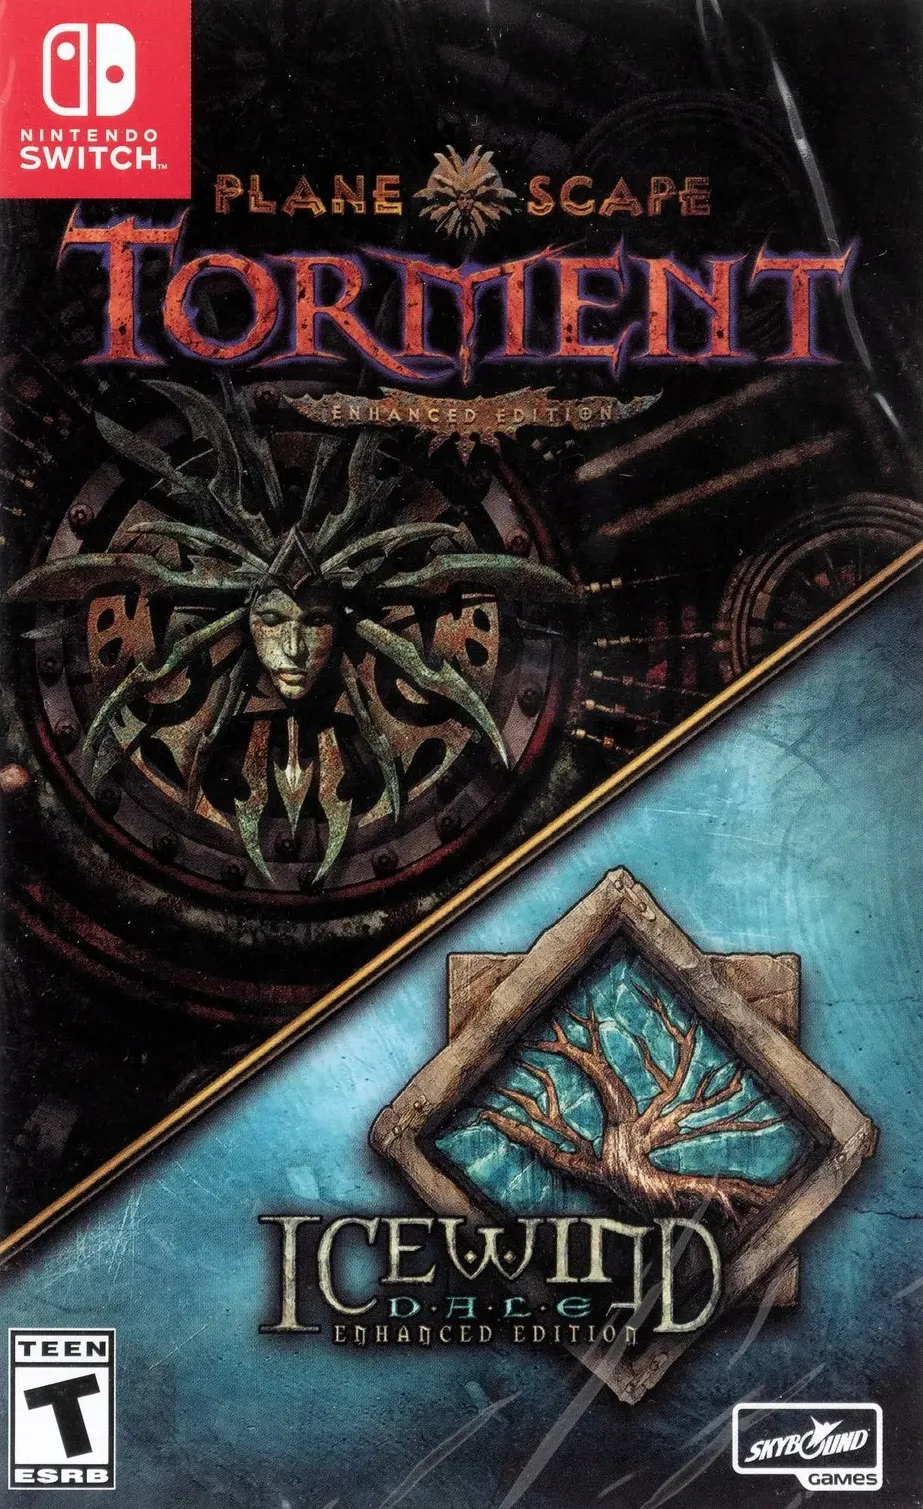 Planescape: Torment / Icewind Dale - Enhanced Edition Video Game